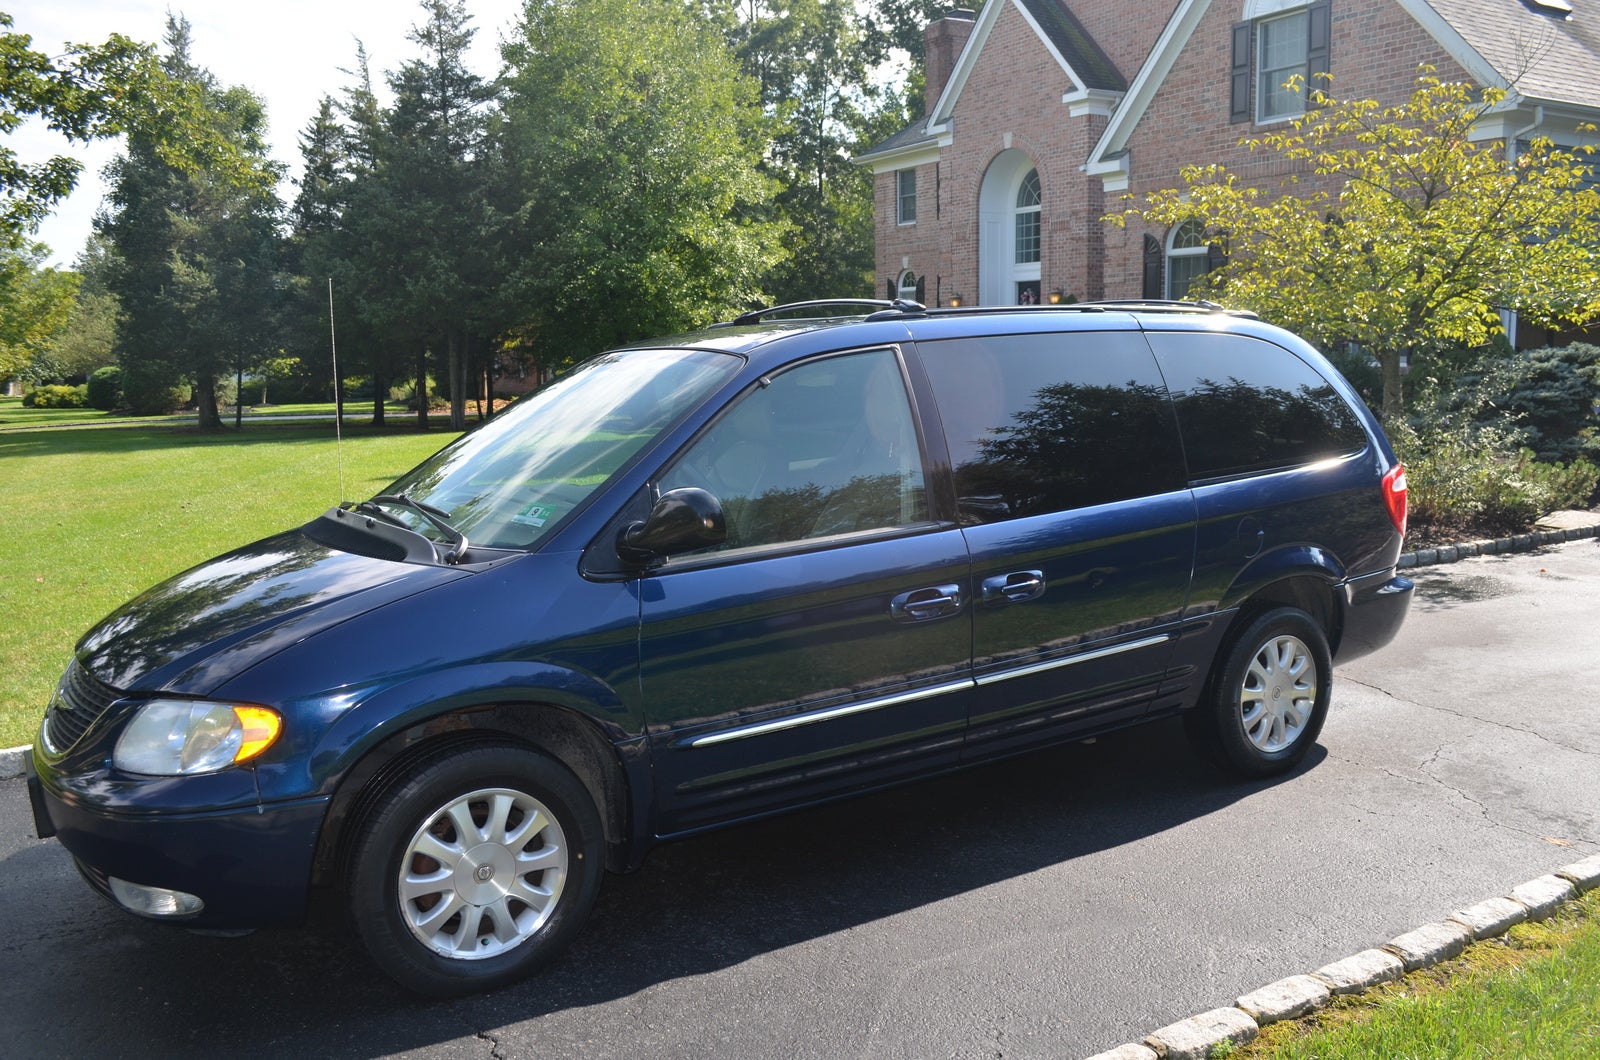 2003 Chrysler Town & Country Pictures CarGurus